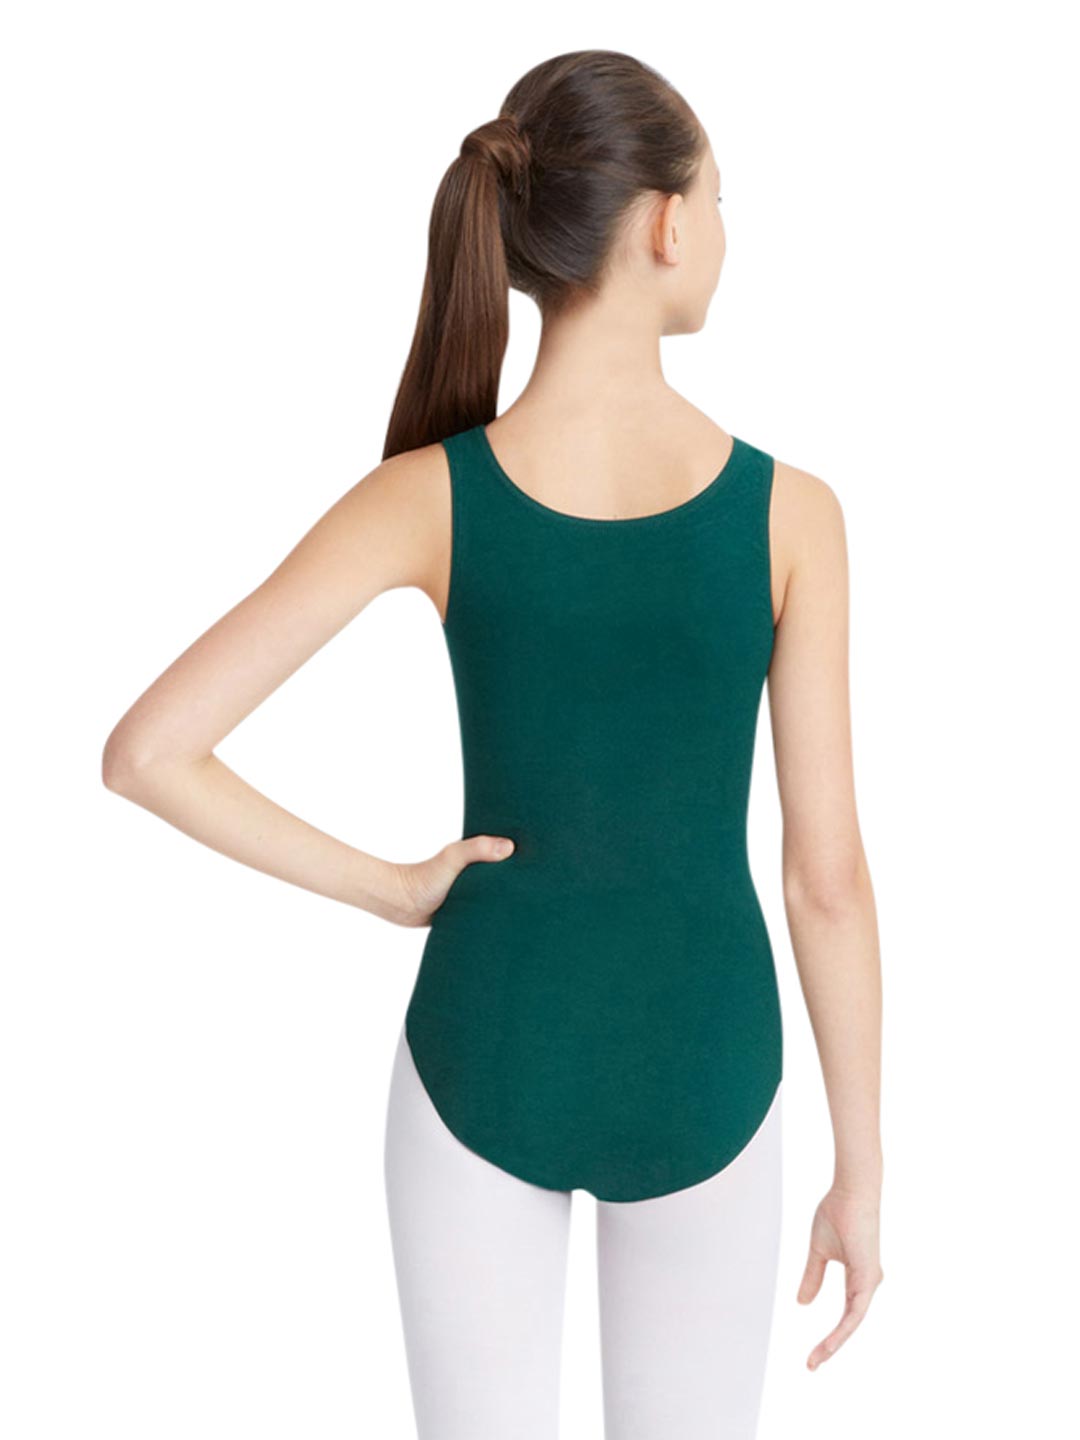 Hunter Green Opaque Stretchy Soft Leotard Tights